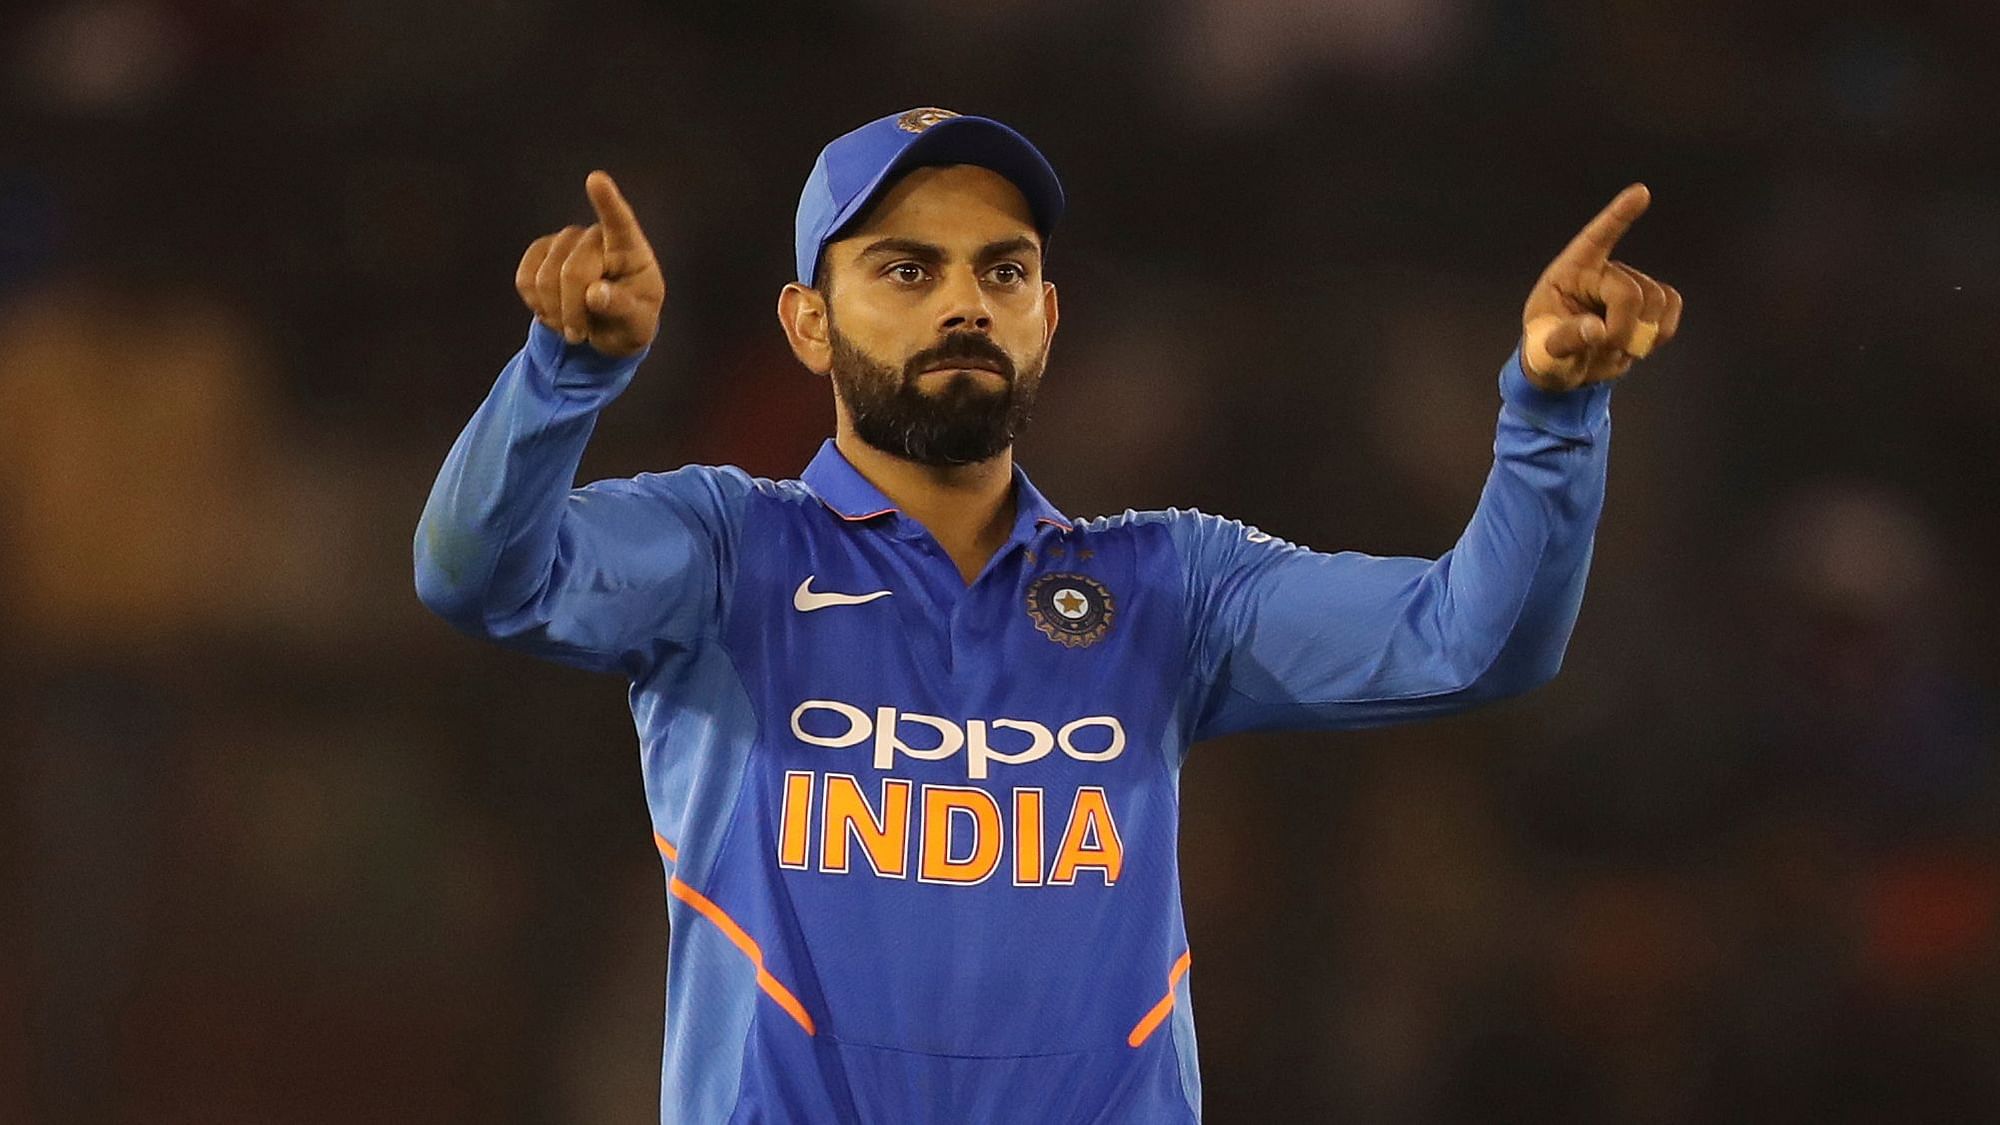 Captain Virat Kohli criticised the Decision Review System, saying “it is not consistent at all and becoming a talking point in every game”.